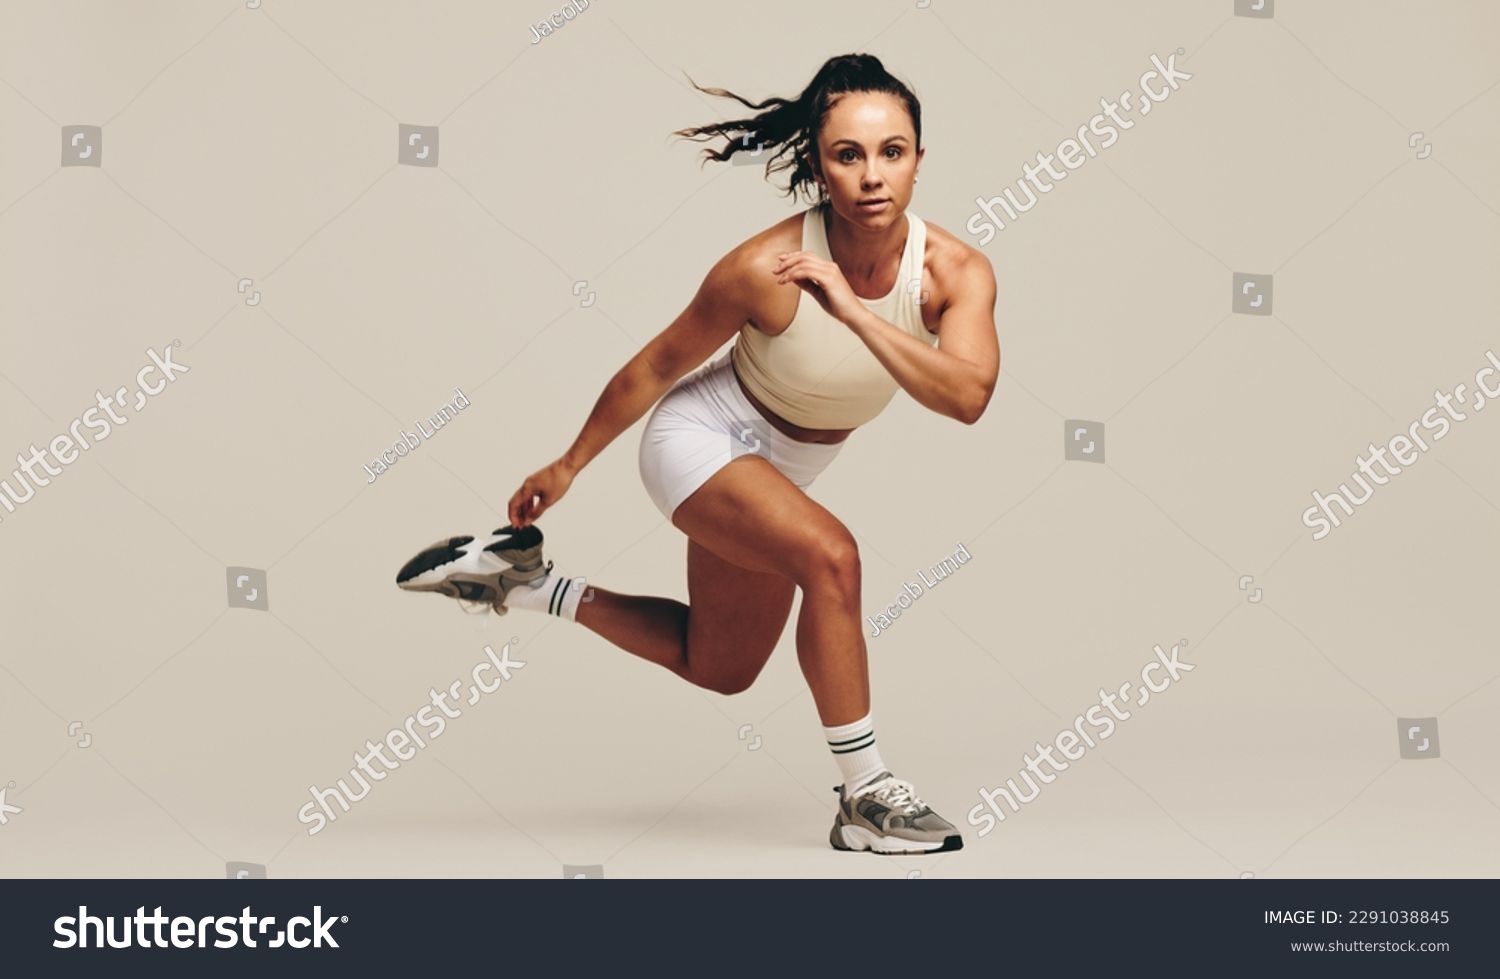 Young female athlete performing strength training exercises in a studio. Sportswoman showing her dedication to improving her body fitness and performance through intense workout techniques. #2291038845